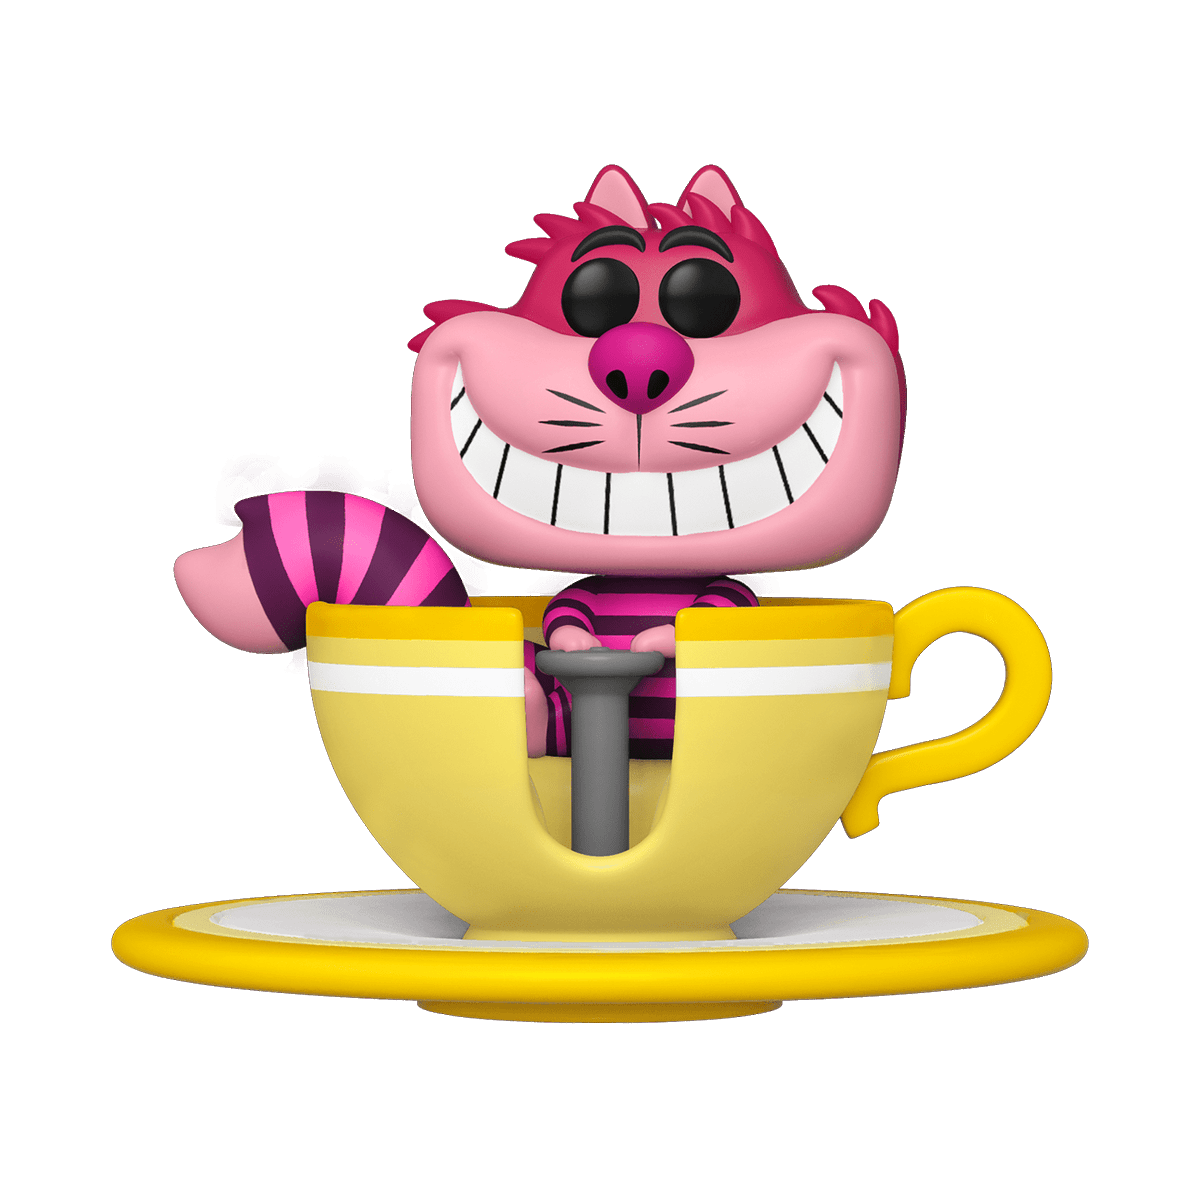 RT & follow @OriginalFunko for the chance to win a @WonderCon / #FunkoVirtualCon exclusive Cheshire at the Mad Tea Party Pop! Ride! bit.ly/34qRW1X